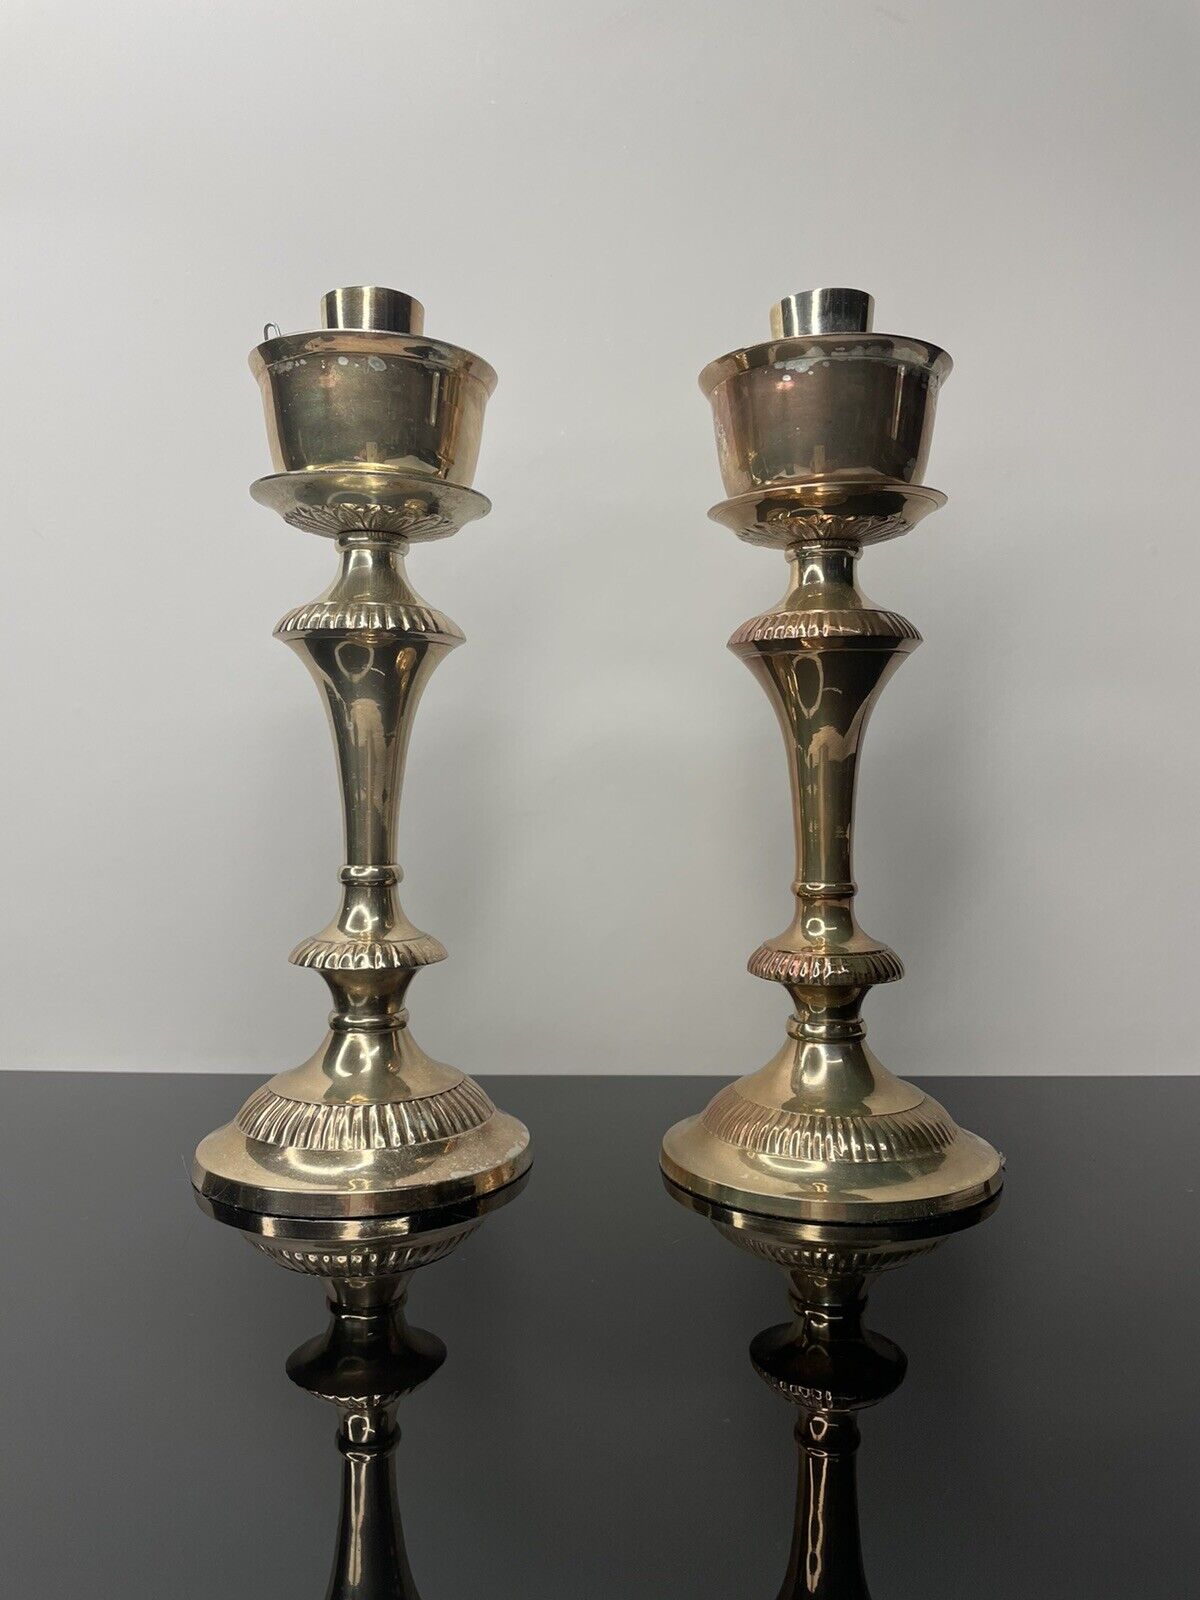 Lot Of 2 S.N.K Ent. Inc. Brass Candle Holders Made In India MINT